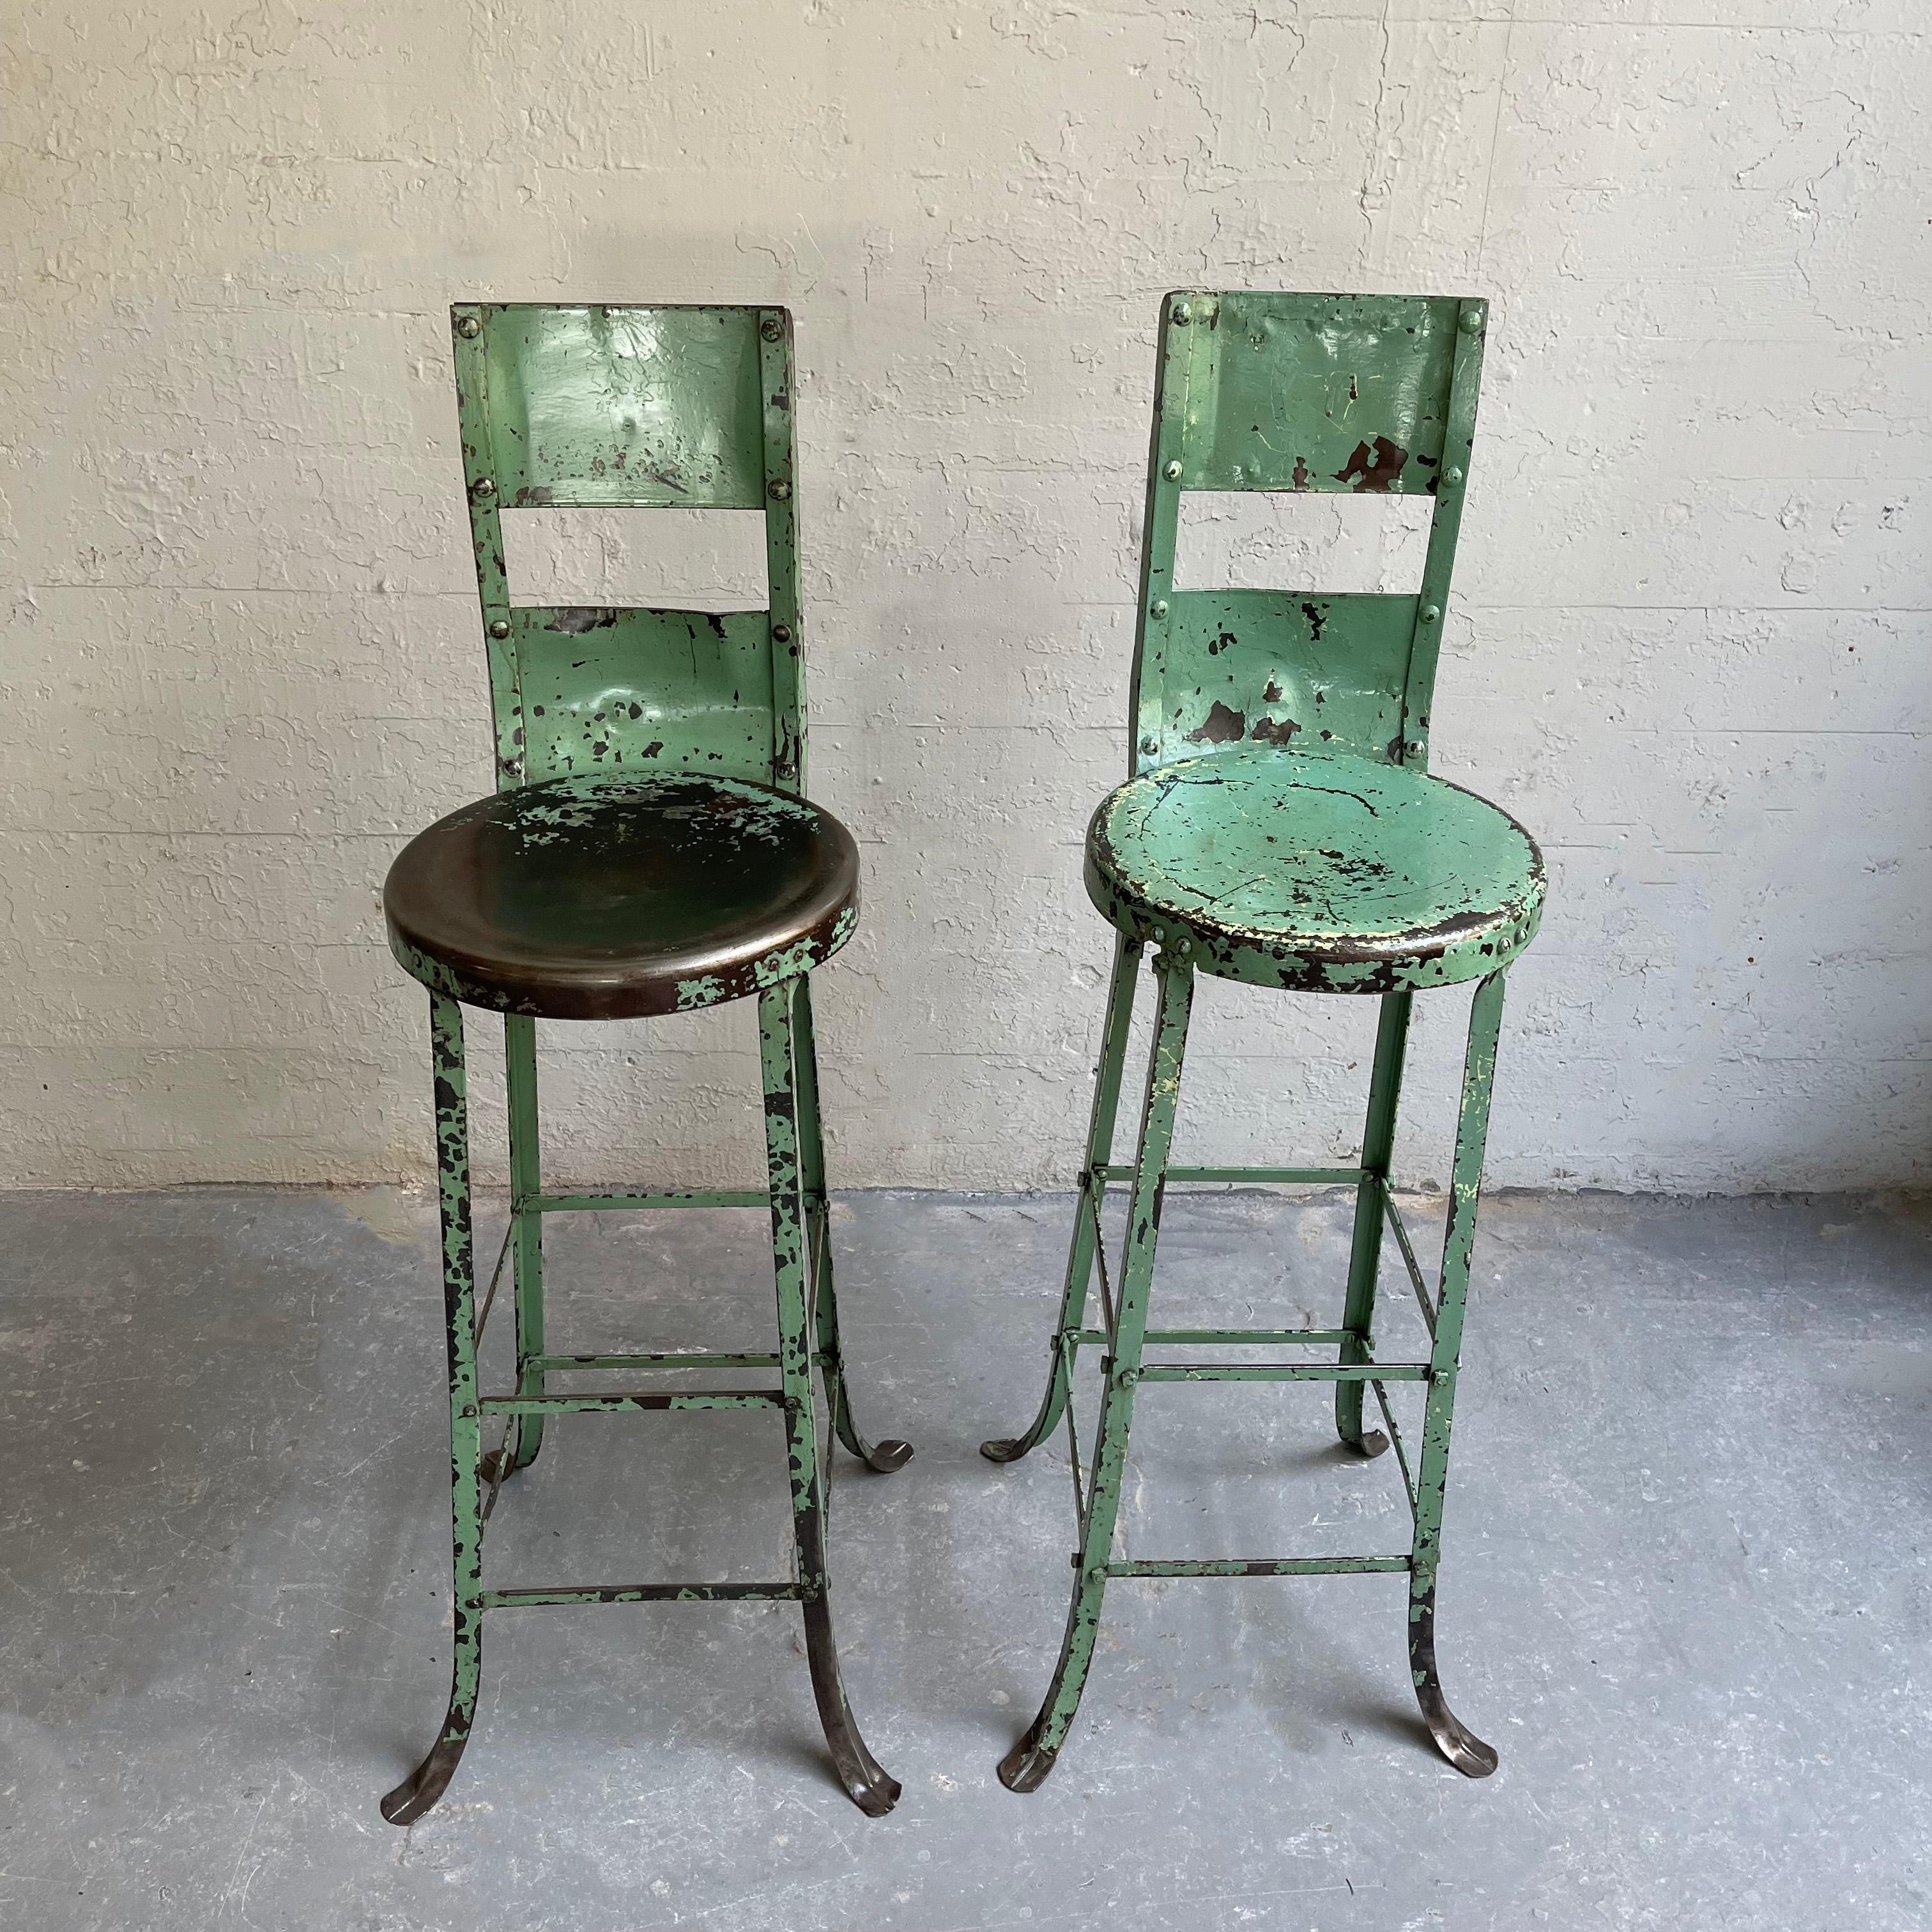 Tall Industrial Painted Steel Shop Stools For Sale 1